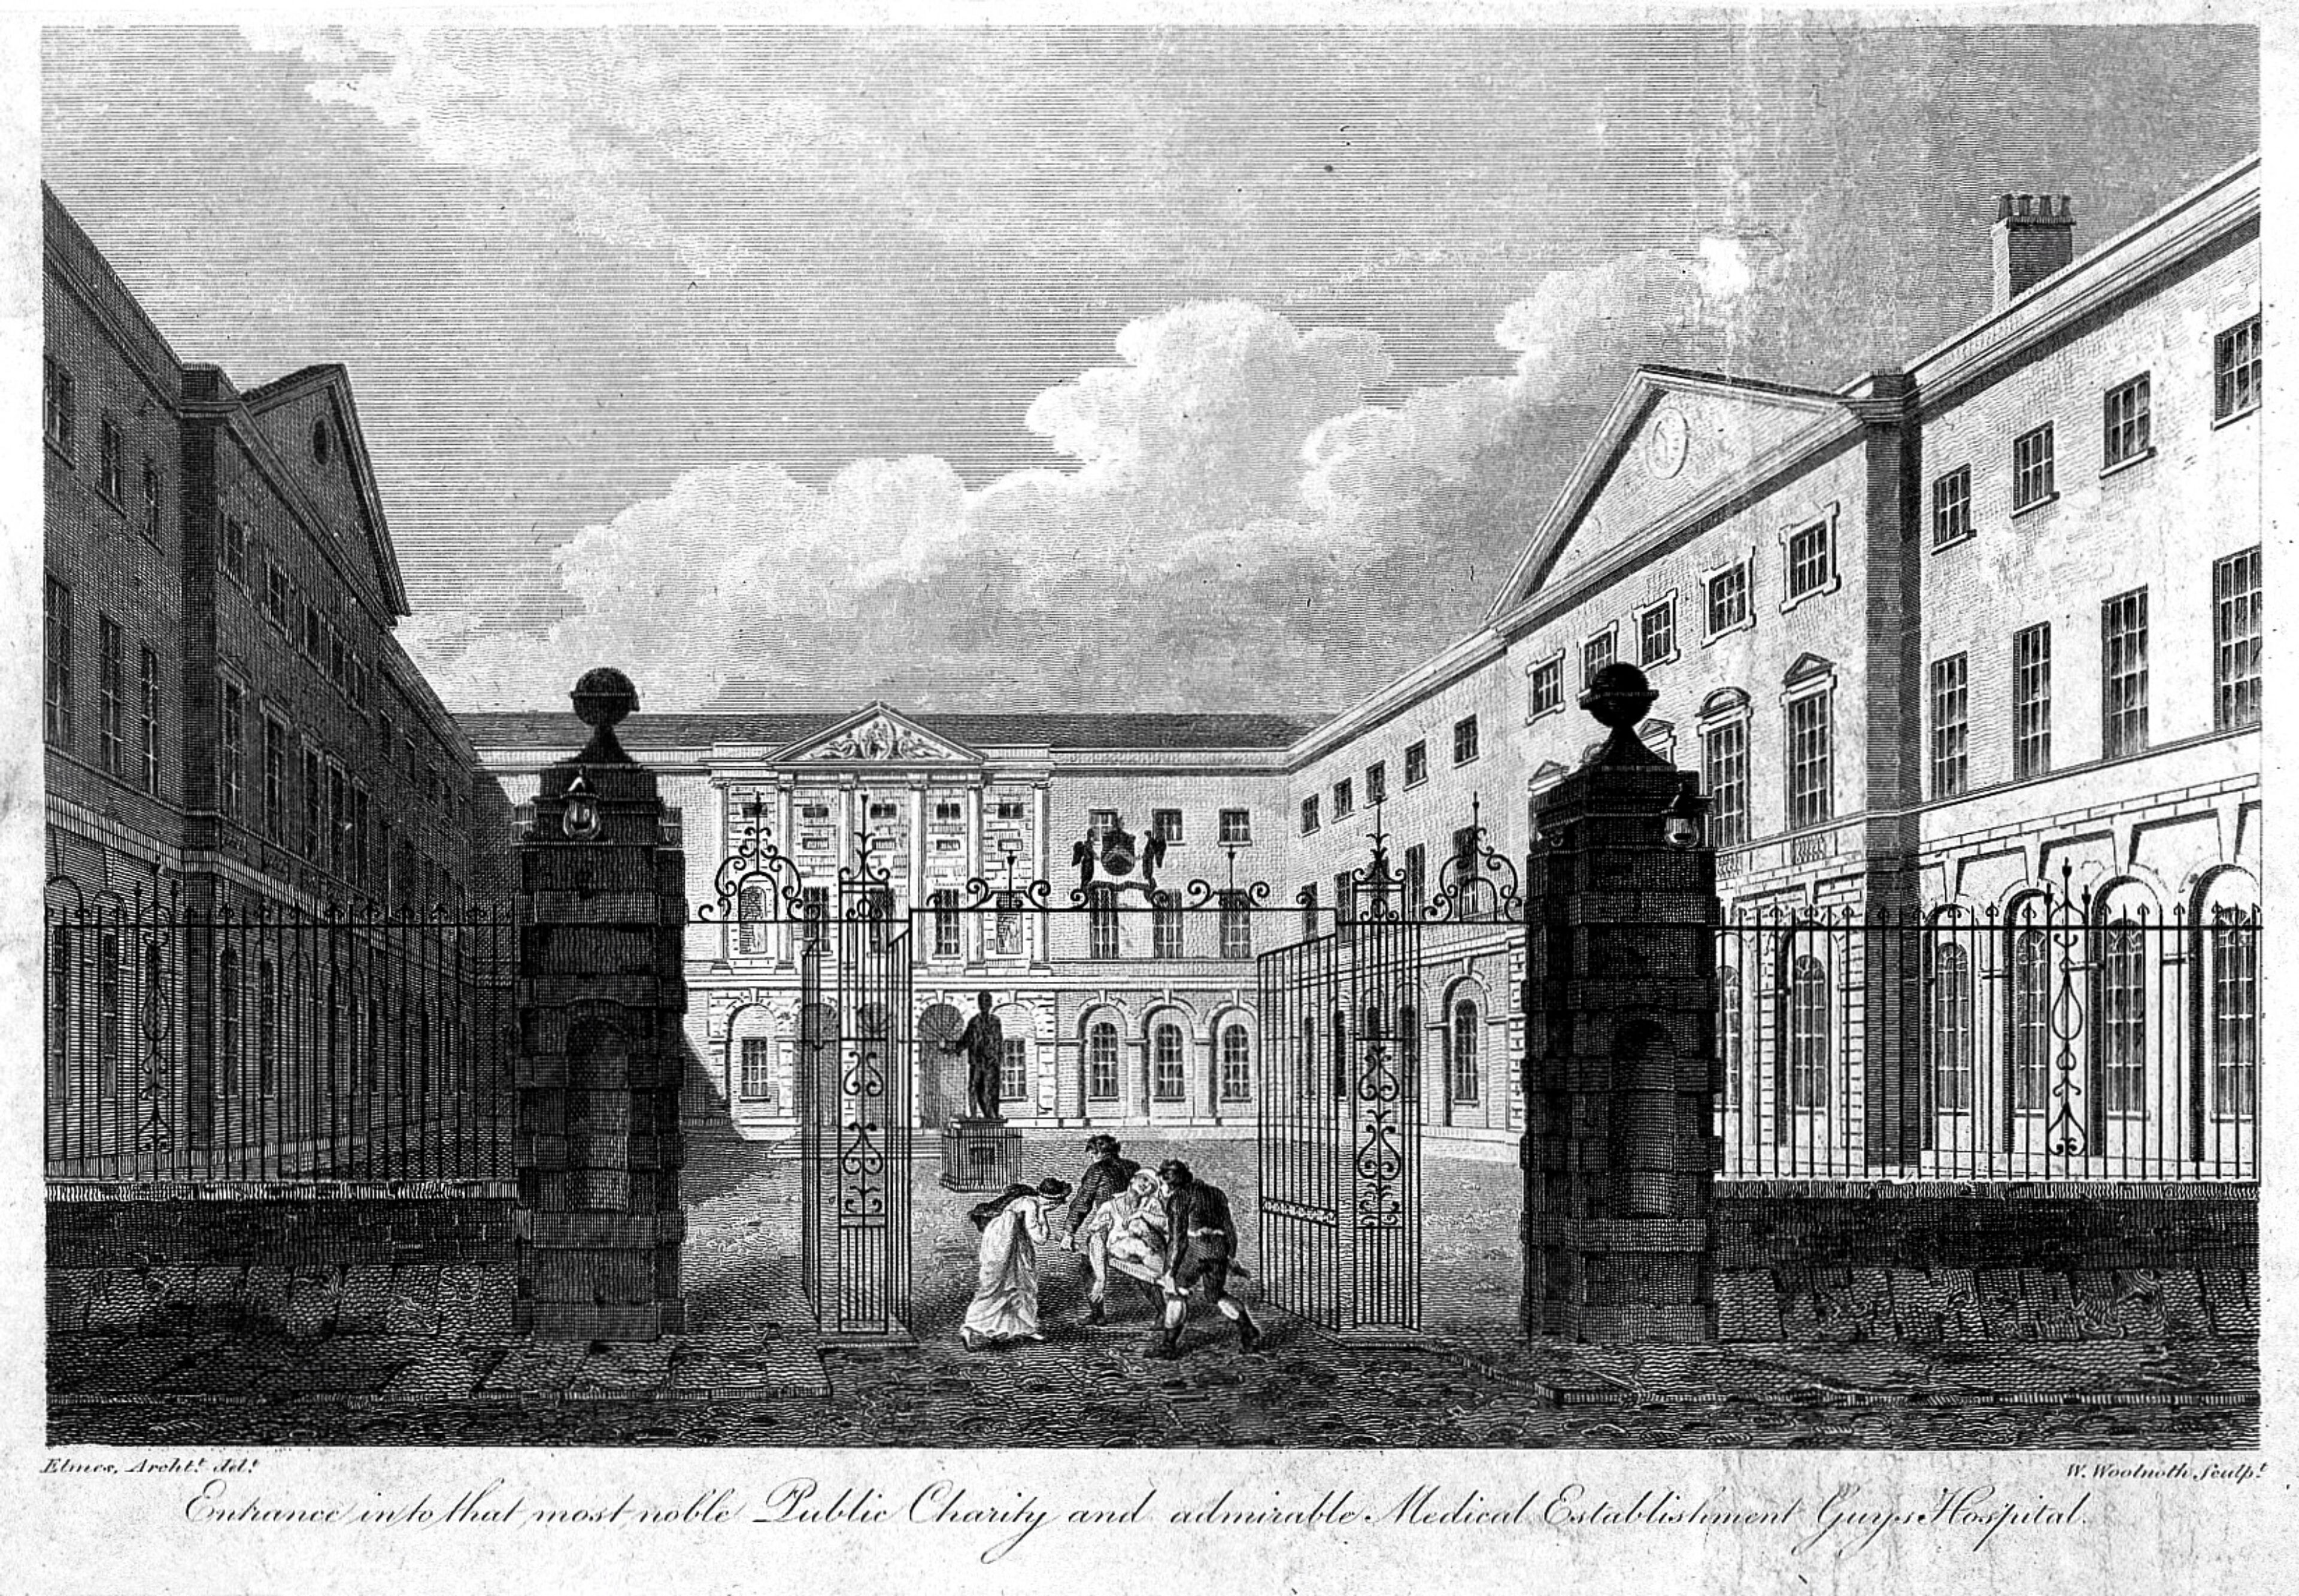 Guy's Hospital, Southwark: the entrance courtyard, with a patient being carried in on a stretcher. Engraving by W. Woolnoth, 1799, after J. Elmes.